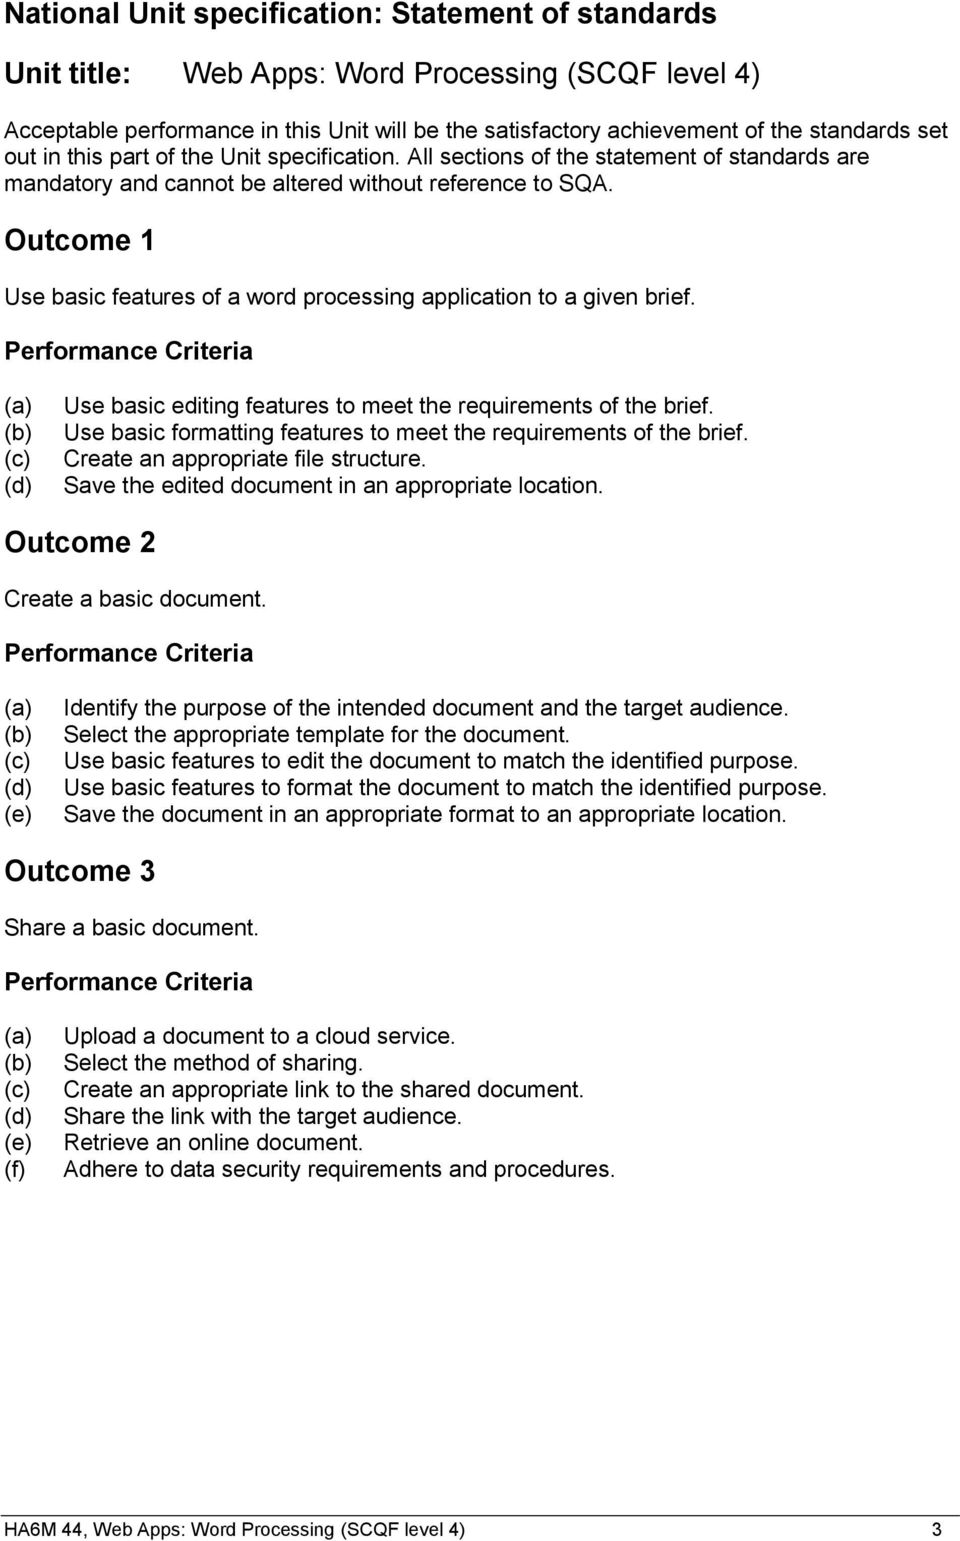 Performance Criteria (a) (b) (c) (d) Use basic editing features to meet the requirements of the brief. Use basic formatting features to meet the requirements of the brief.